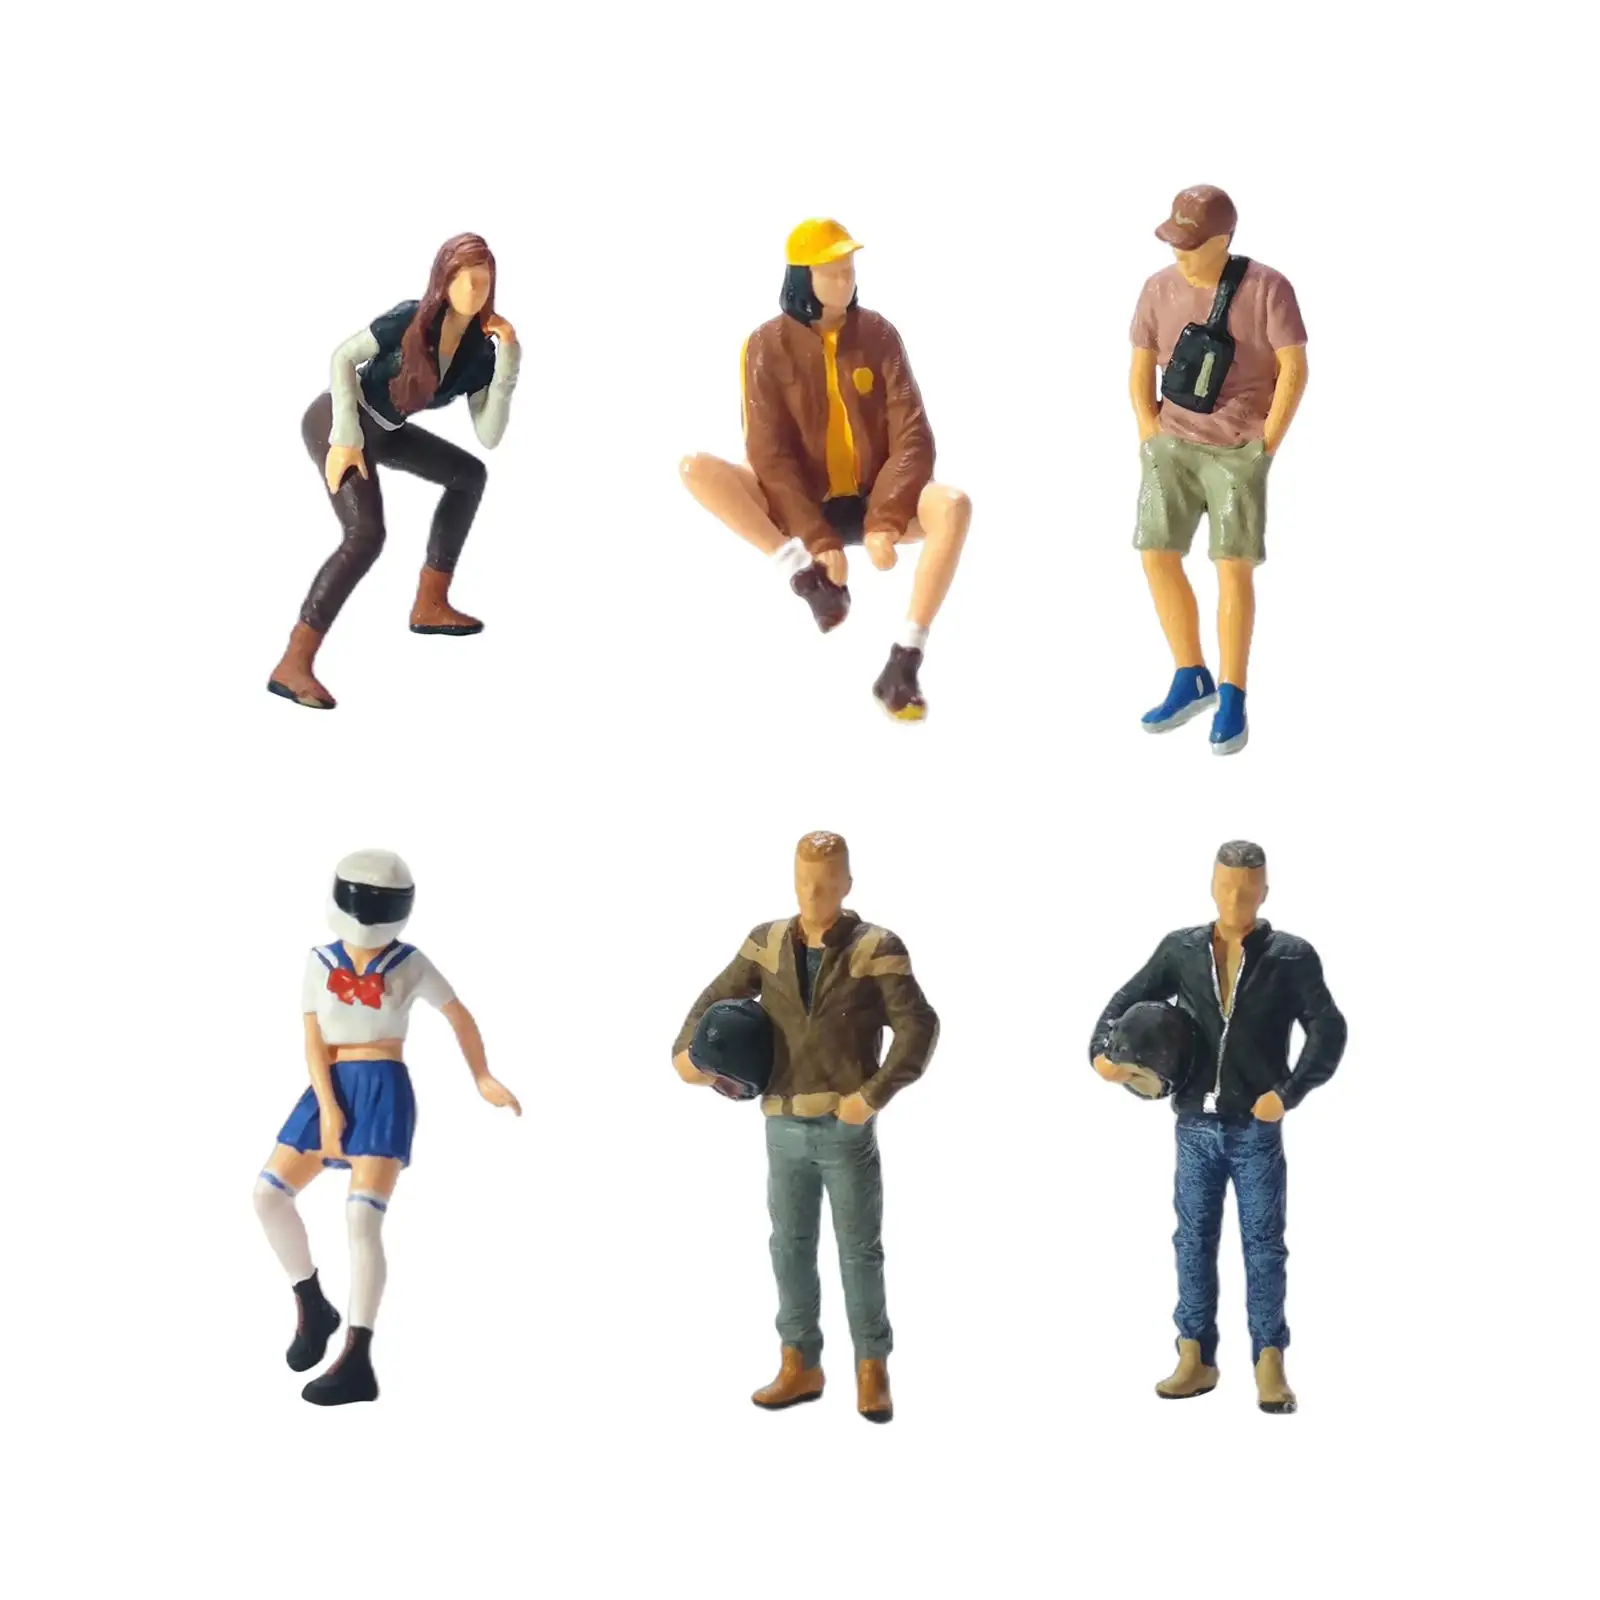 1/64 Model People Figures 1/64 Scale Figures Resin 1/64 Figures for Dollhouse Decor